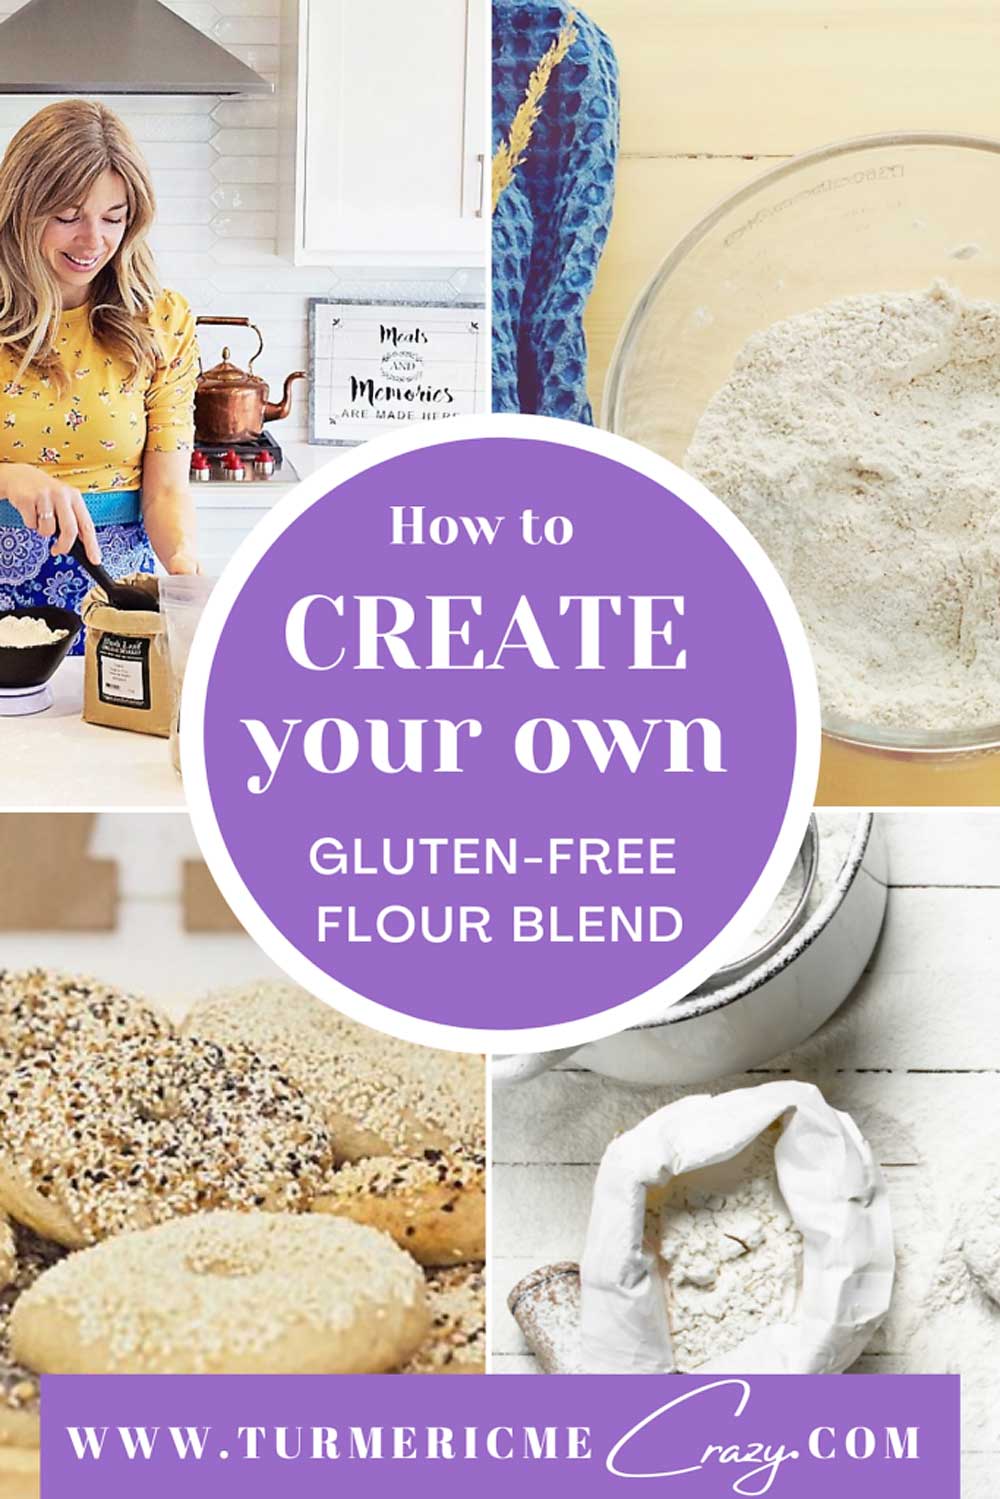 How to CREATE your own Gluten-Free Flour Blend. I hope to provide you with the skills to make your own blend as well as give you the details of how to make my Crazy Good Gluten-Free All-Purpose Flour, a great blend to use as a starting point, a substitute for All-Purpose Flour or for unlimited Gluten-Free baking recipes! gluten free flour blend, gluten free flours, gluten free, gluten free flour mix